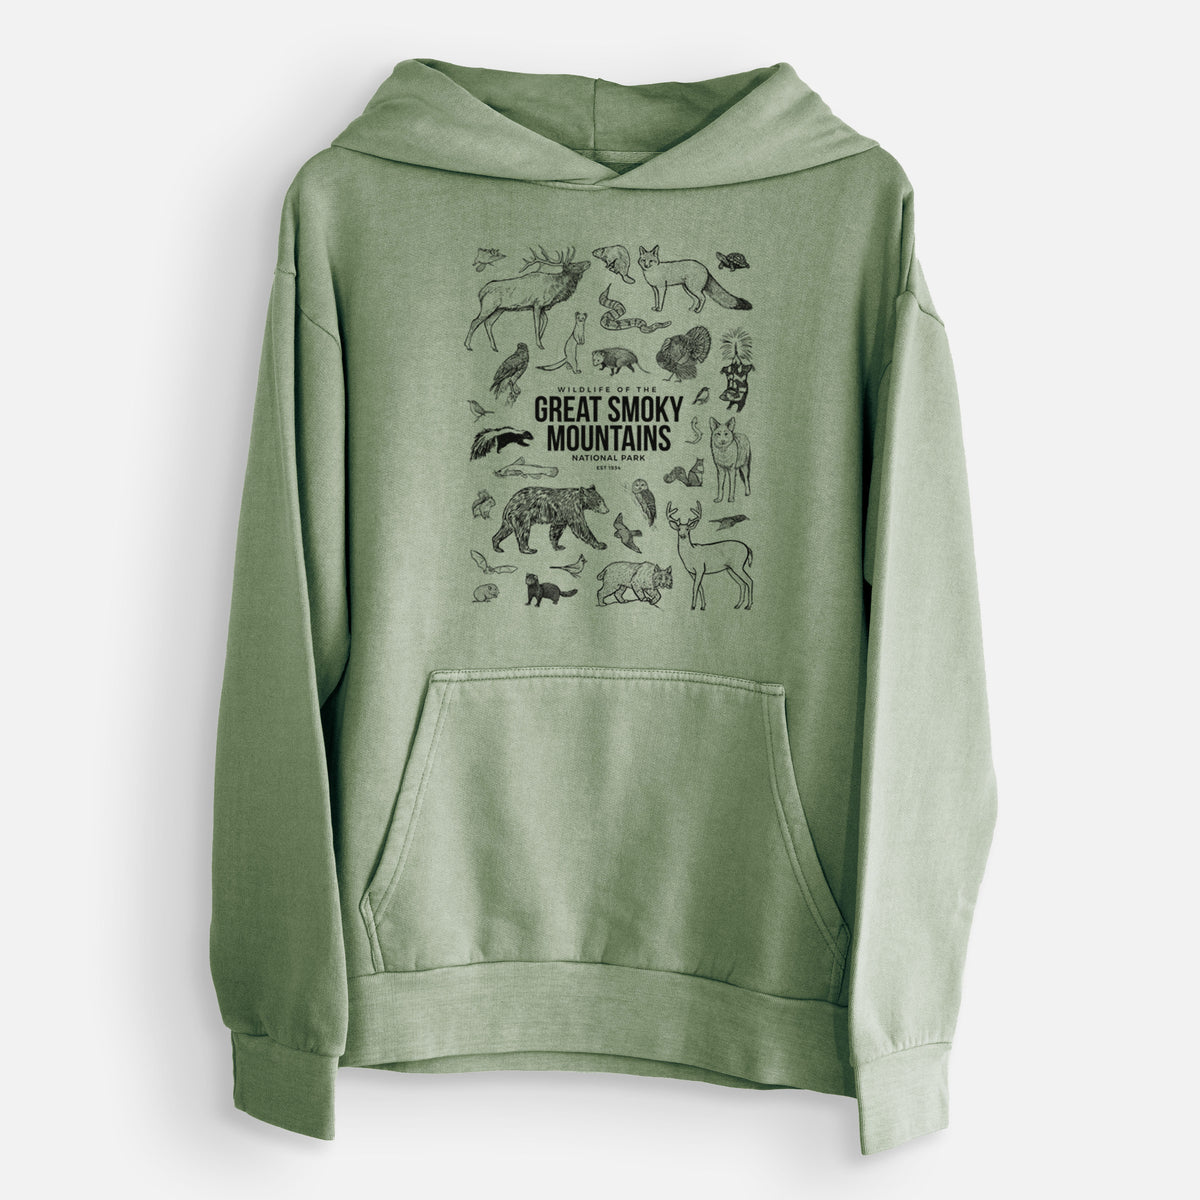 Wildlife of the Great Smoky Mountains National Park  - Urban Heavyweight Hoodie